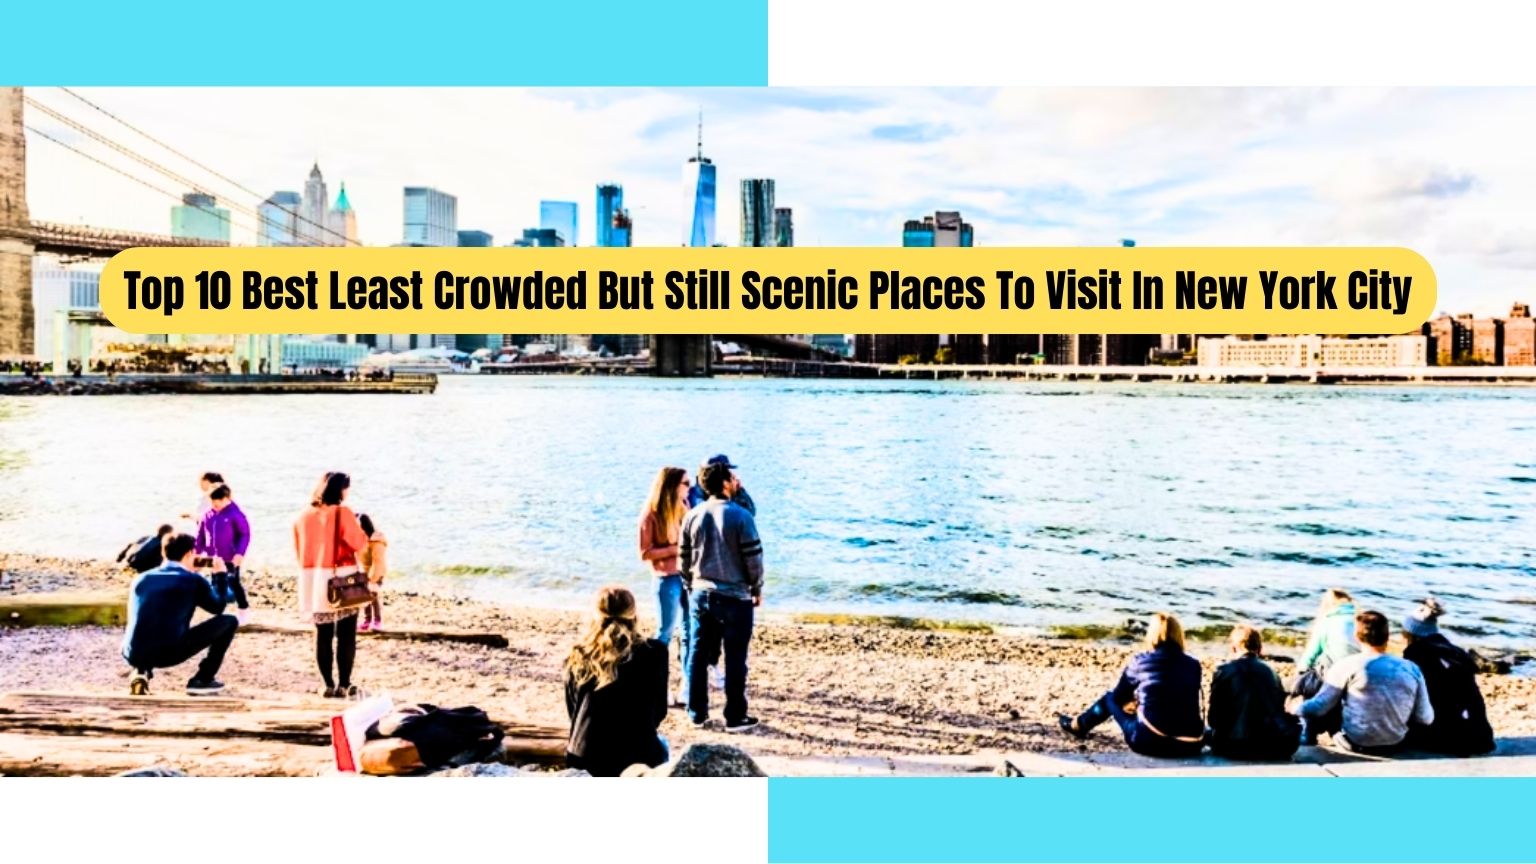 Least crowded places in new york city to live, Top 10 Best least crowded but still scenic places to visit in new york city, Best least crowded but still scenic places to visit in new york city